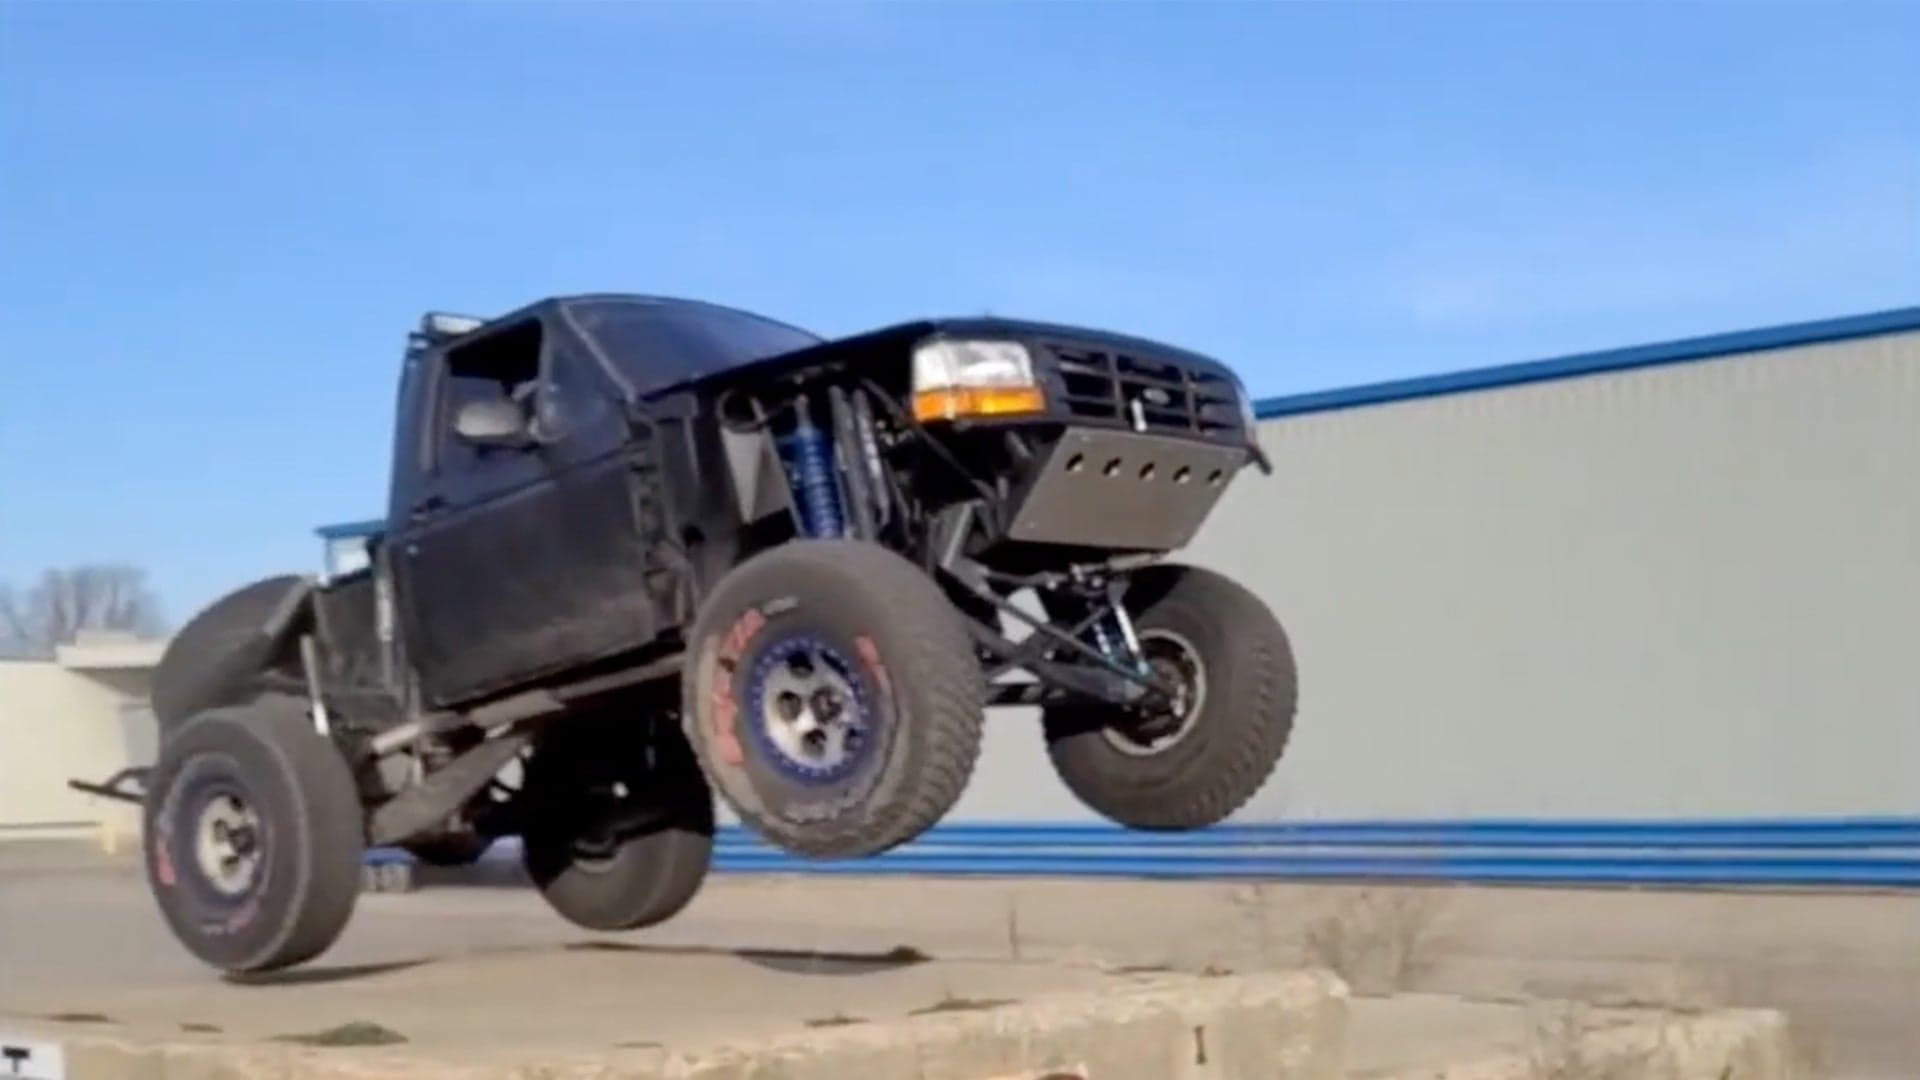 A 7.3L Godzilla V8 Swap Makes This Ford F-150 Prerunner a Serious Dune Slayer